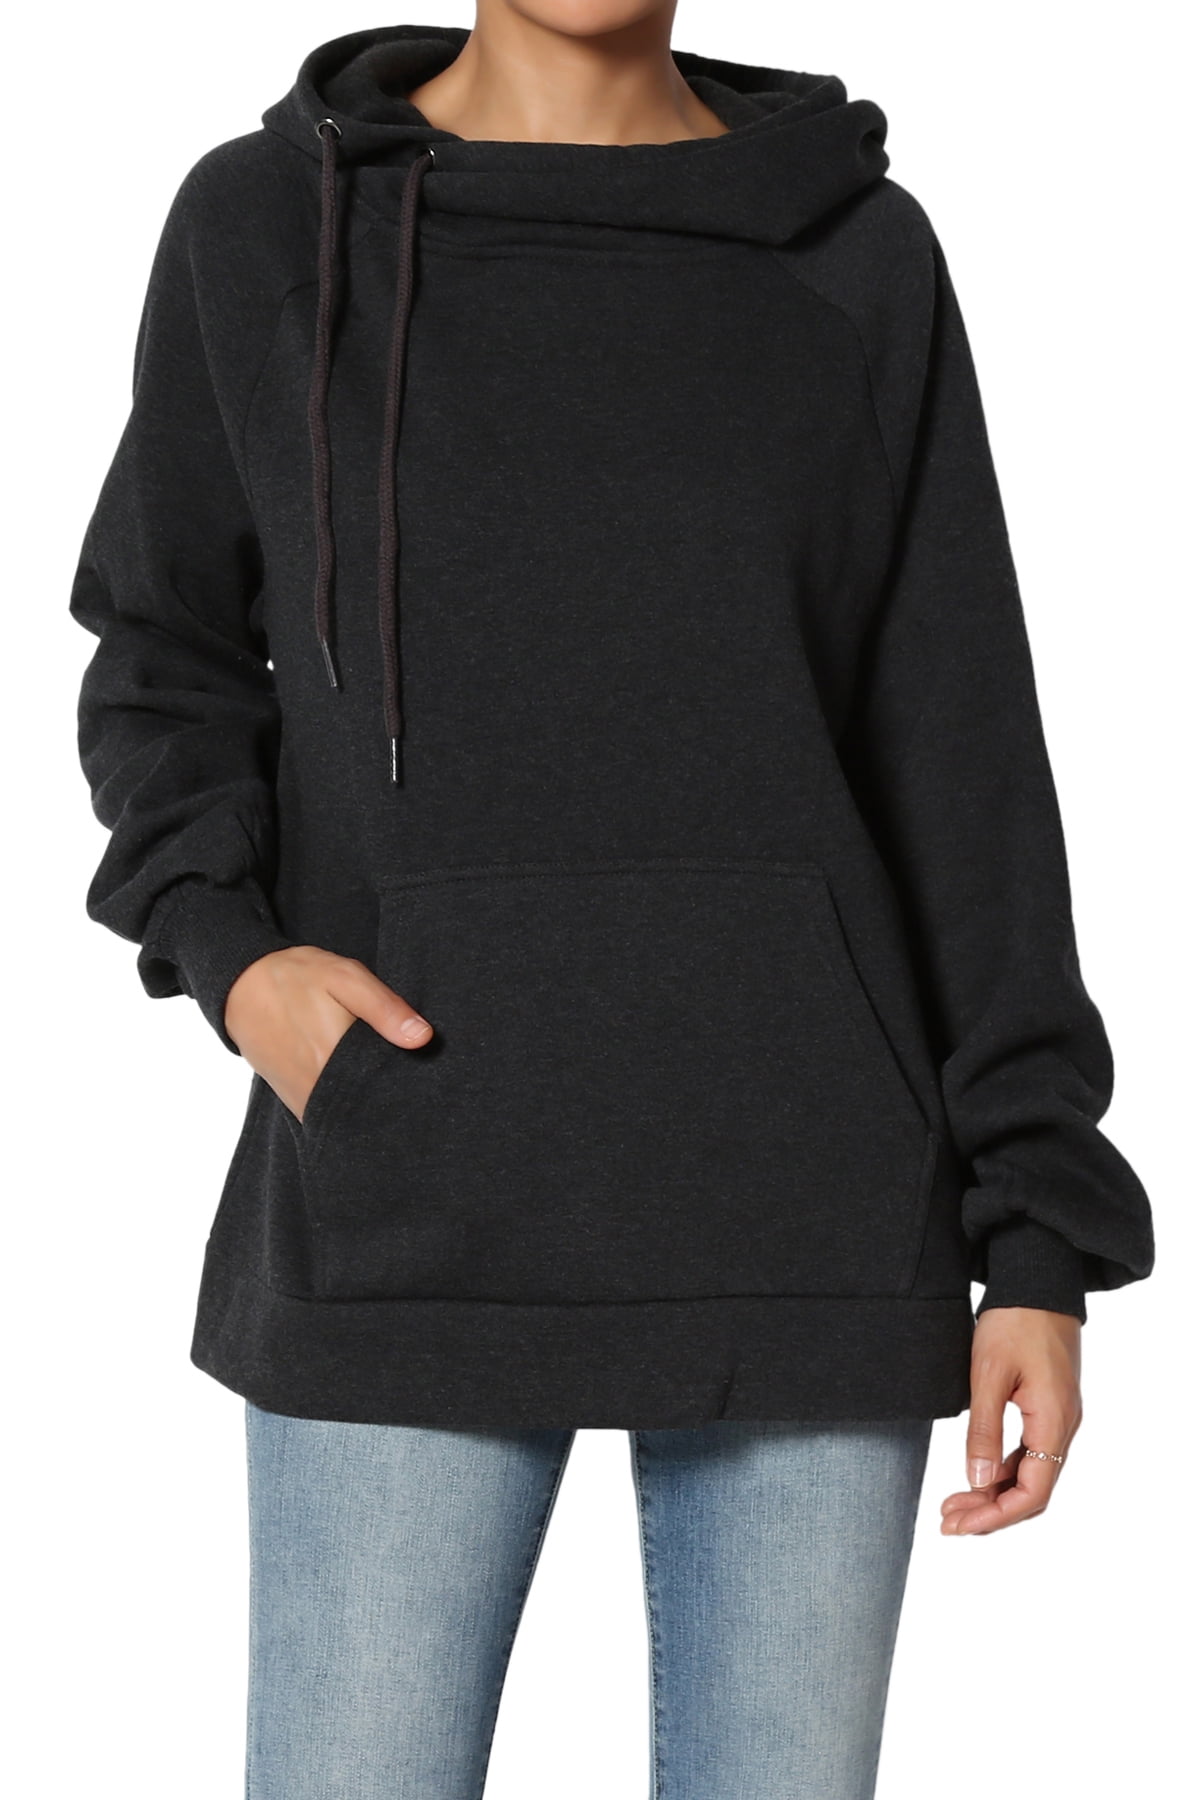 TheMogan Women's S~3X Drawstring Cozy Fleece Relaxed Fit Hooded ...